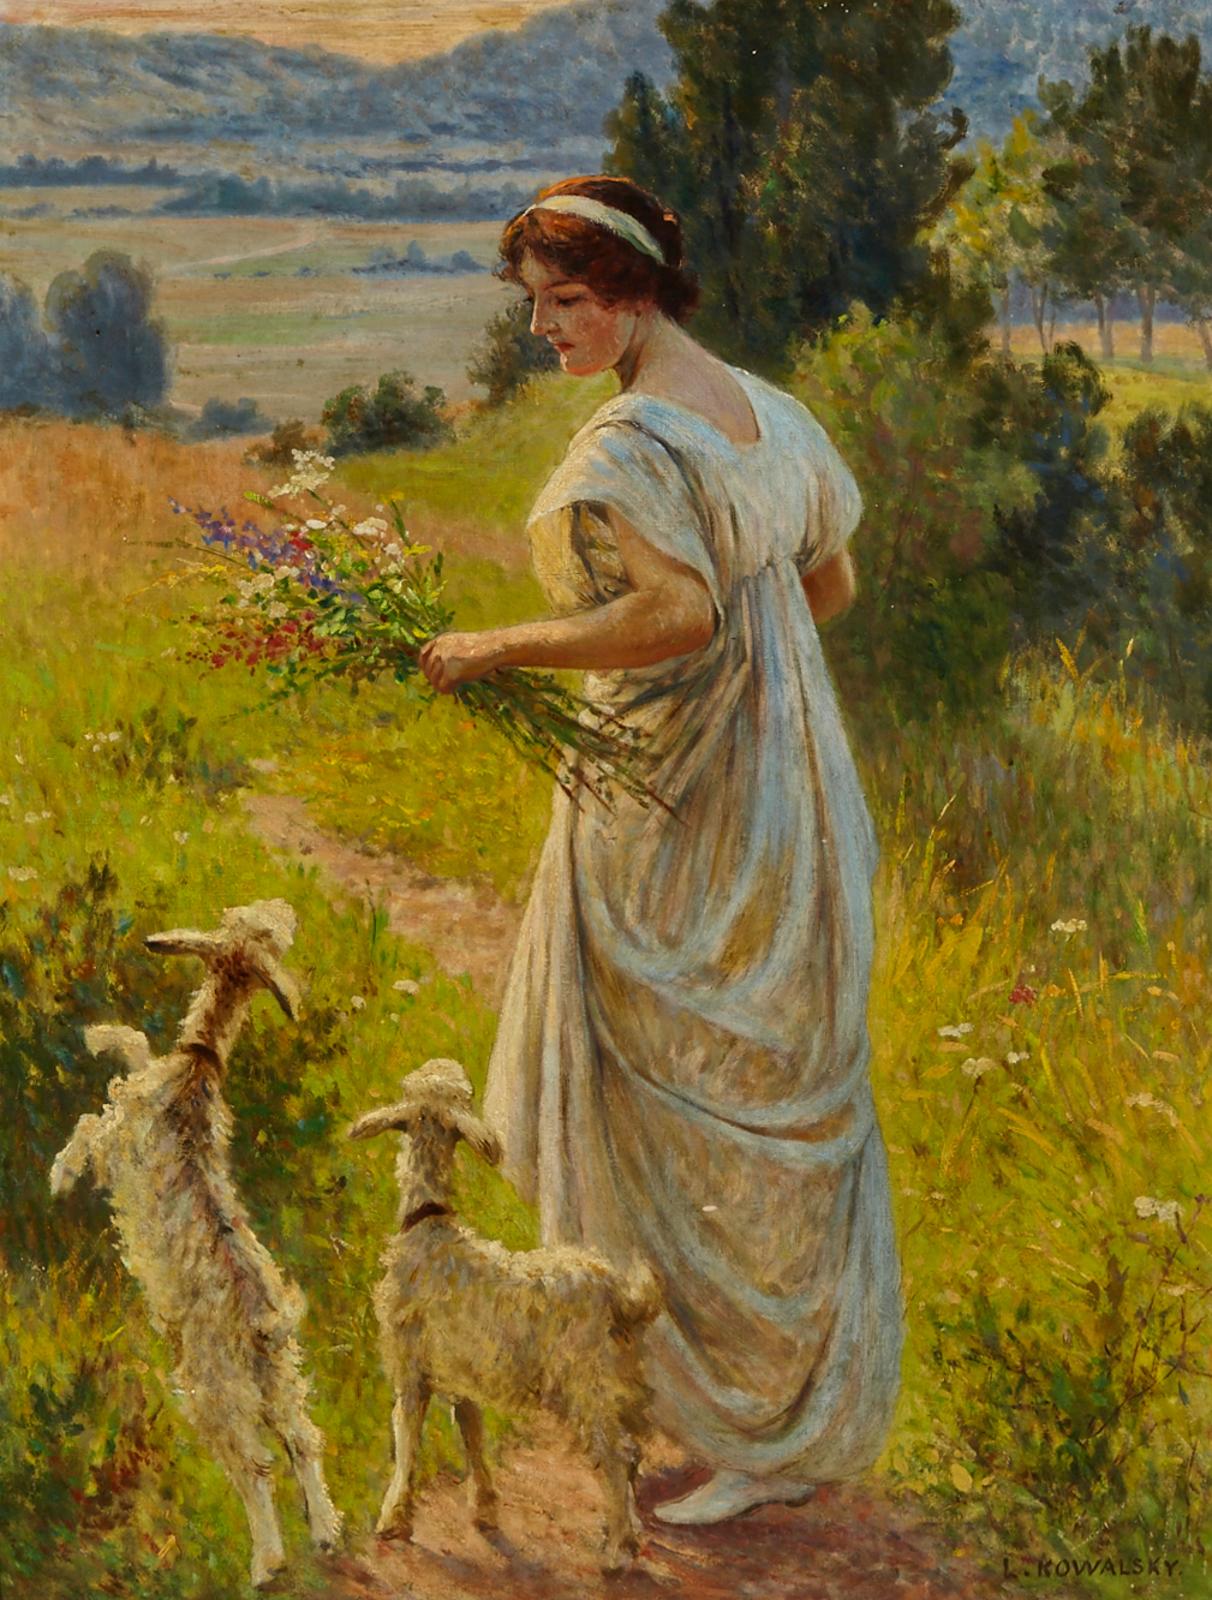 Leopold Franz (Francois) Kowalsky (1856-1931) - Maiden And Lambs In A Sunlit Glade